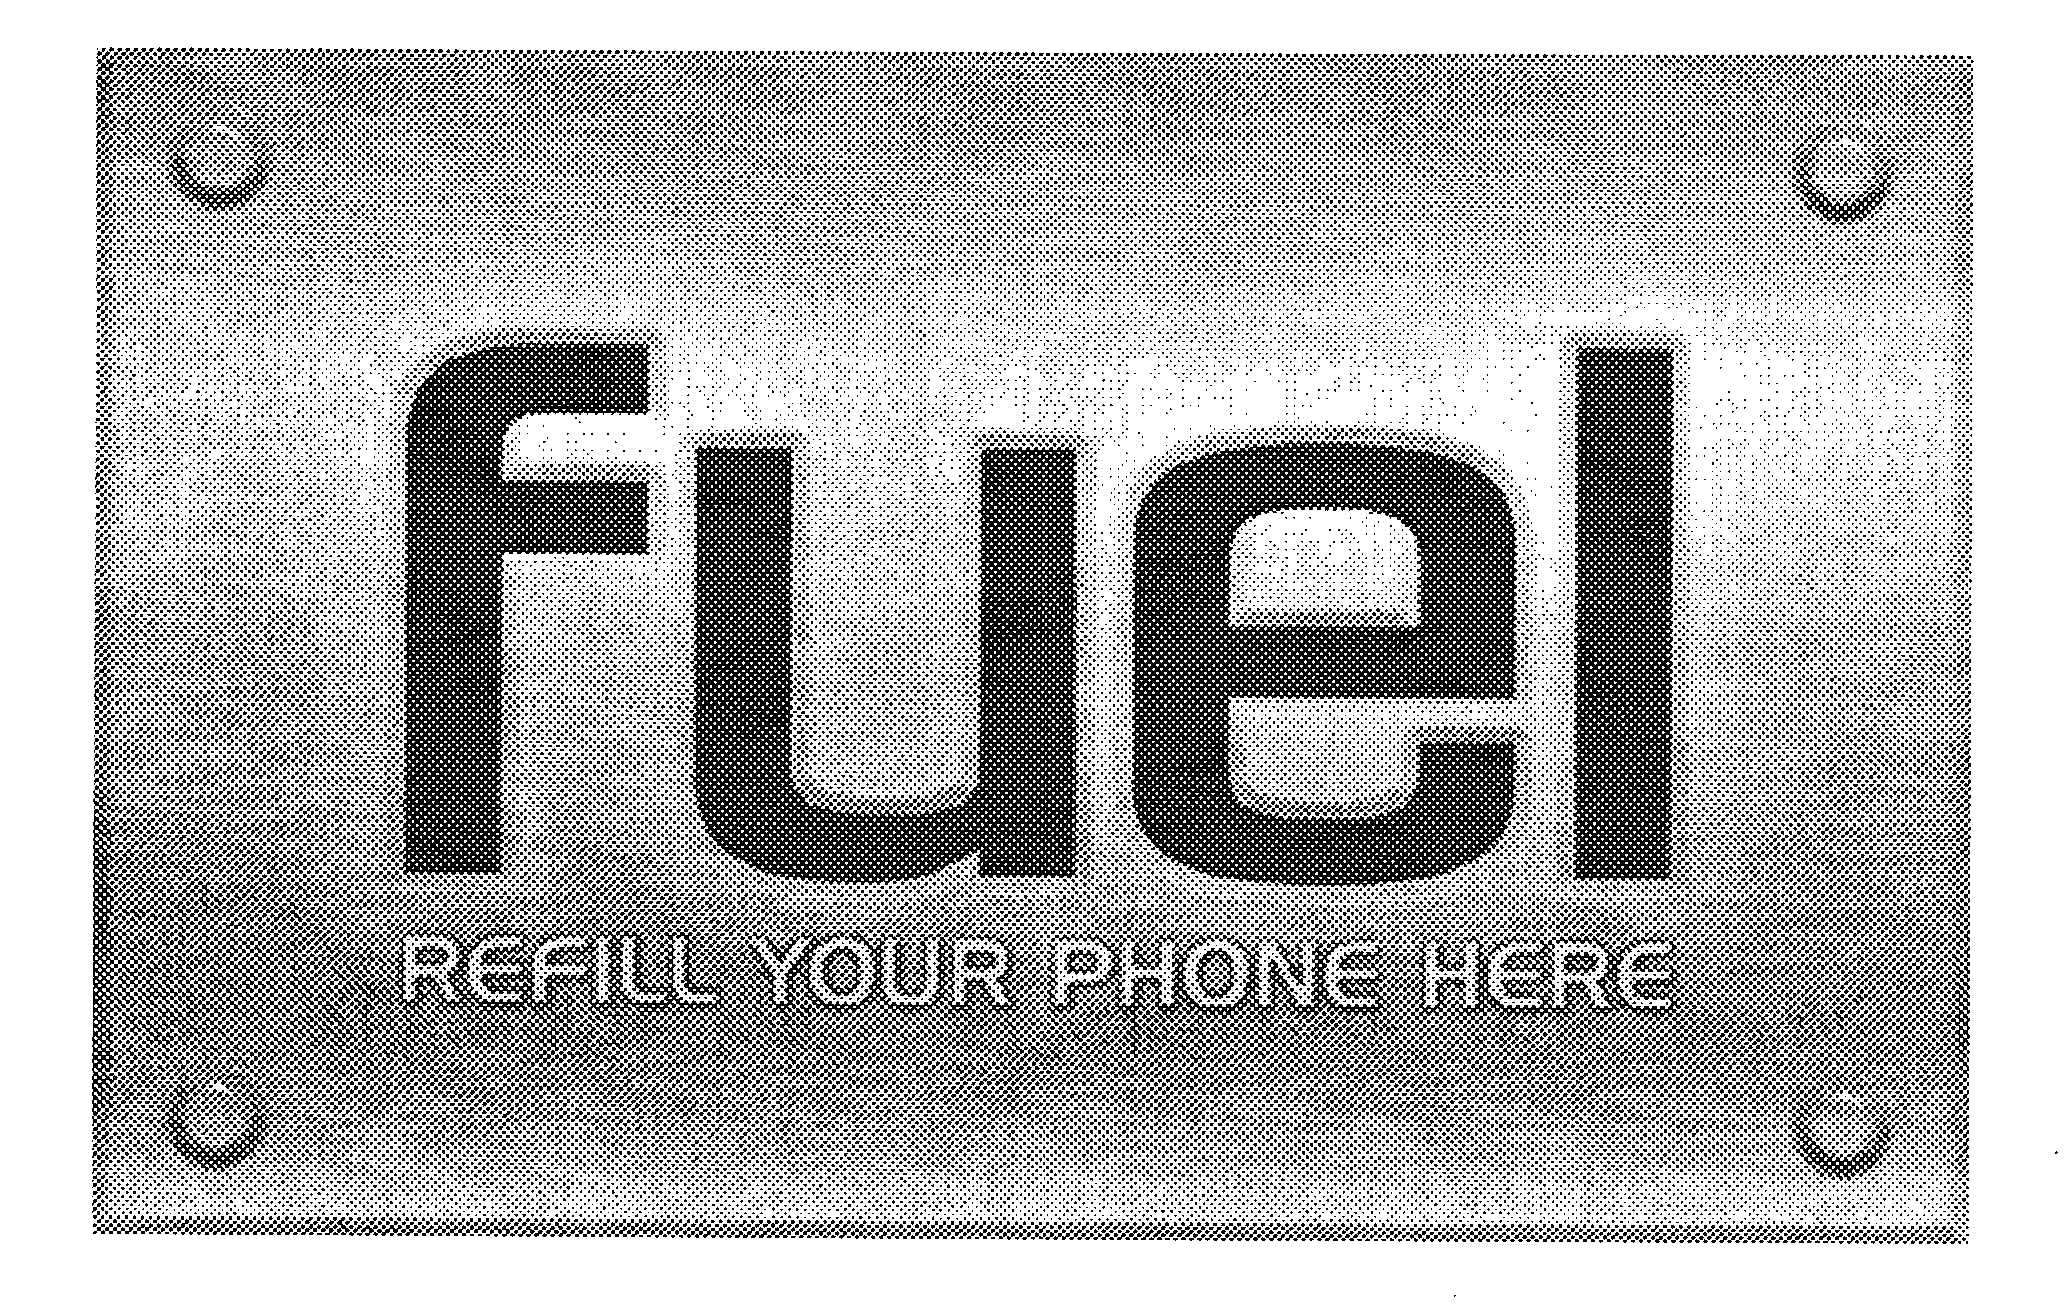  FUEL REFILL YOUR PHONE HERE